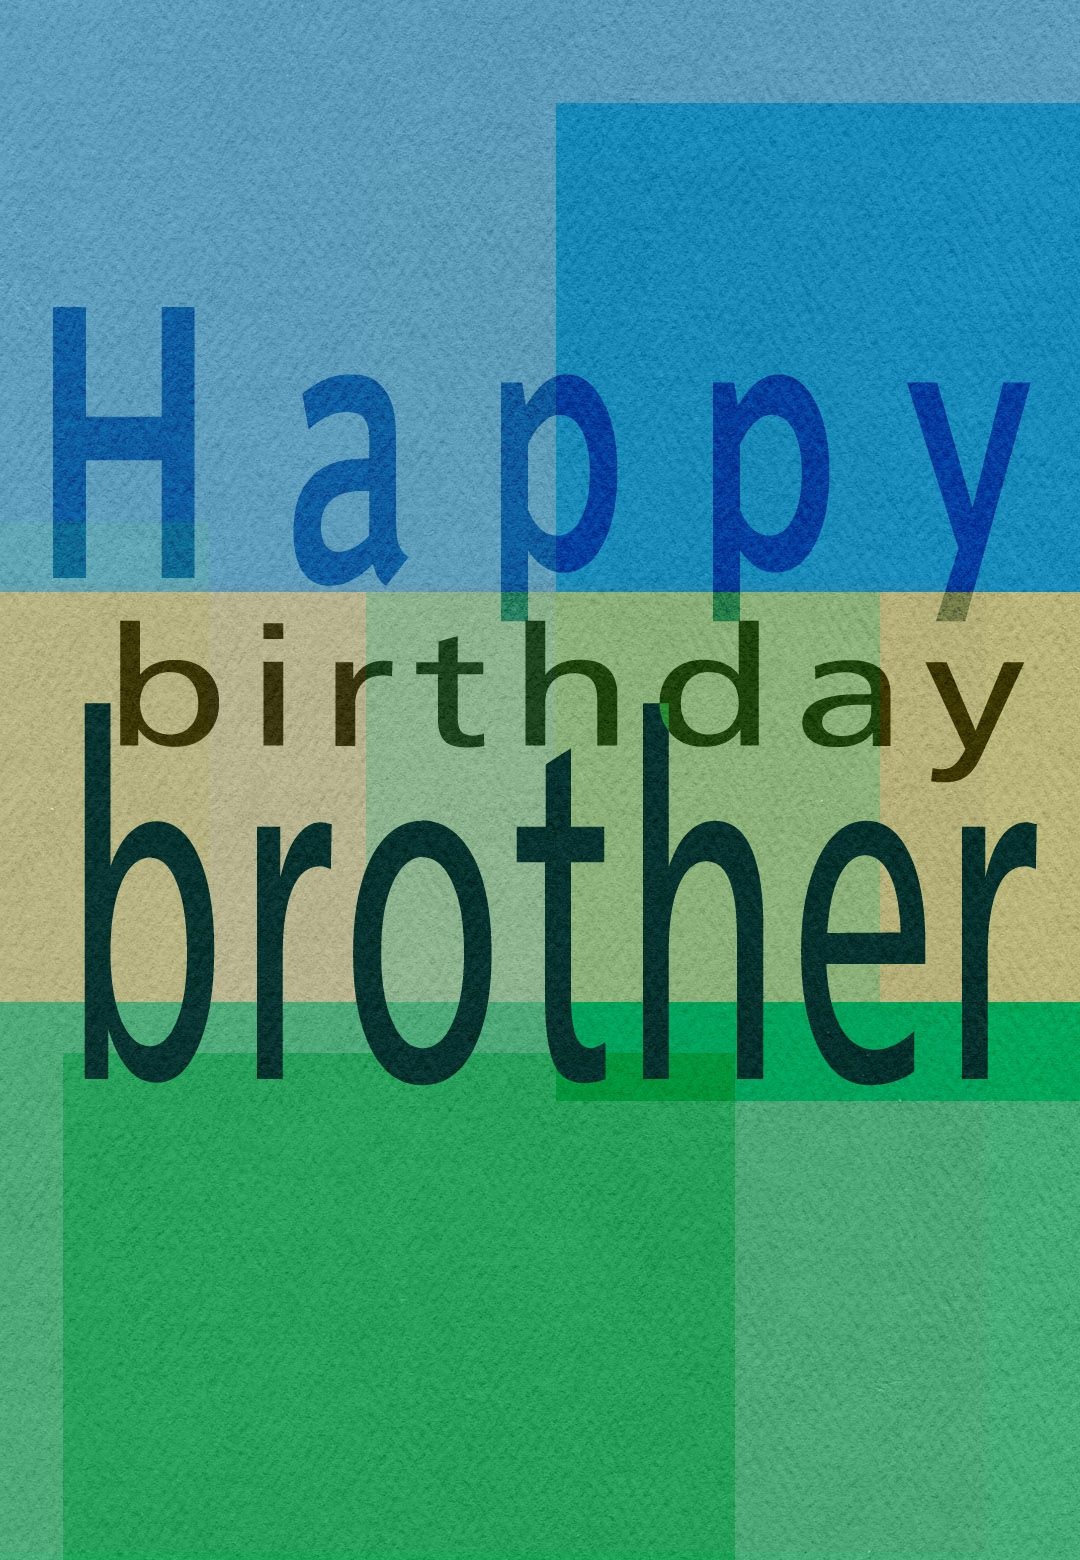 Free Printable Greeting Cards | Gift Ideas | Happy Birthday Brother - Free Printable Birthday Cards For Brother